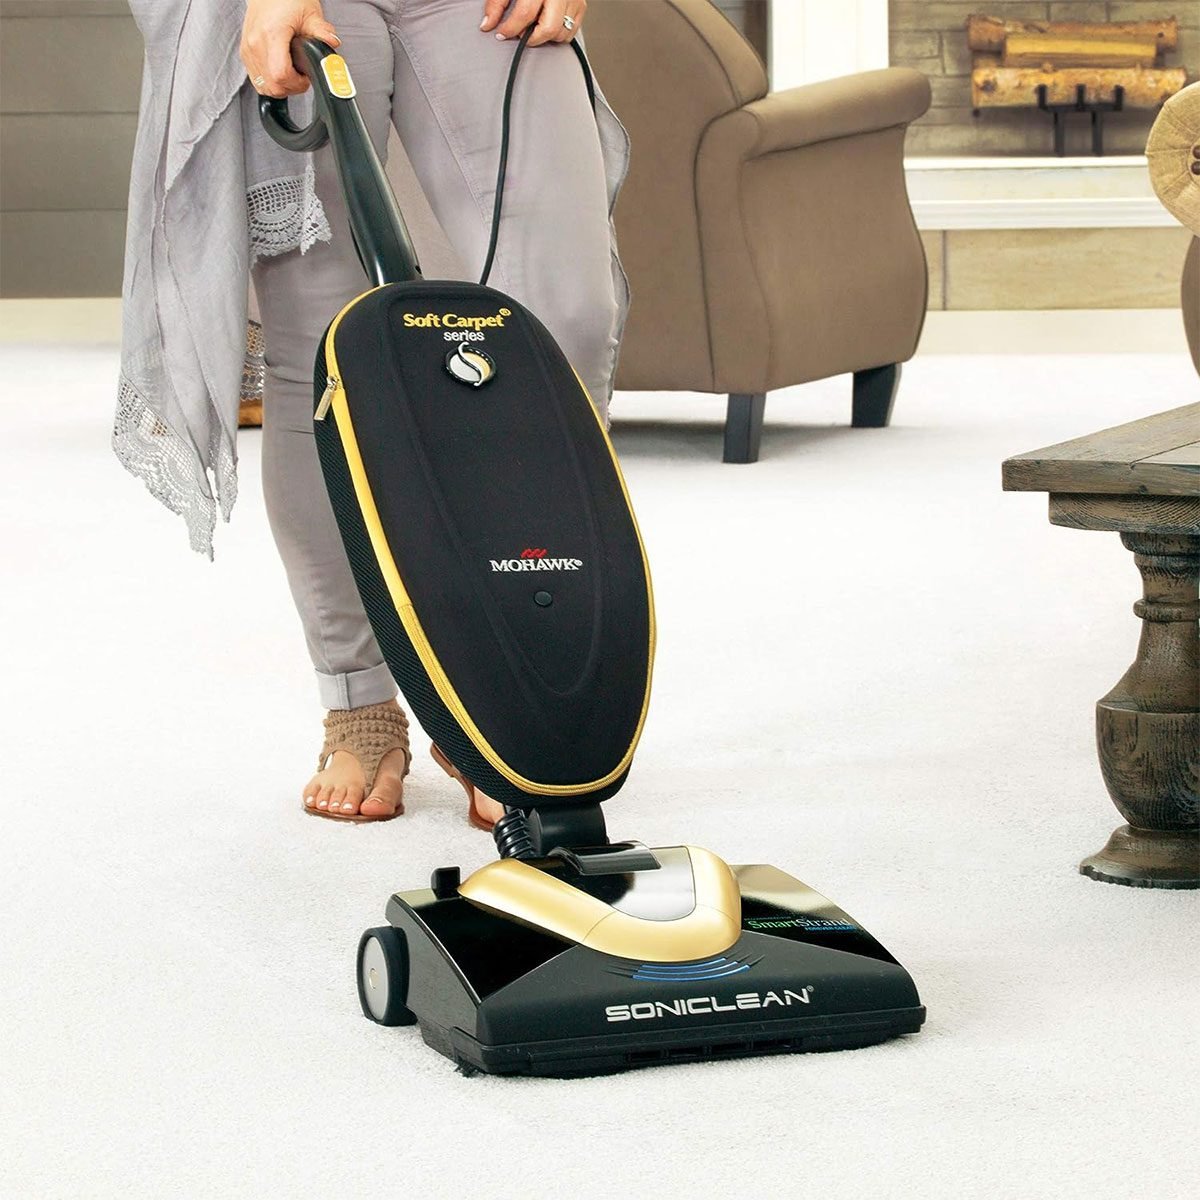 The 10 Best Vacuum Cleaners for Every Kind of Floor and Mess